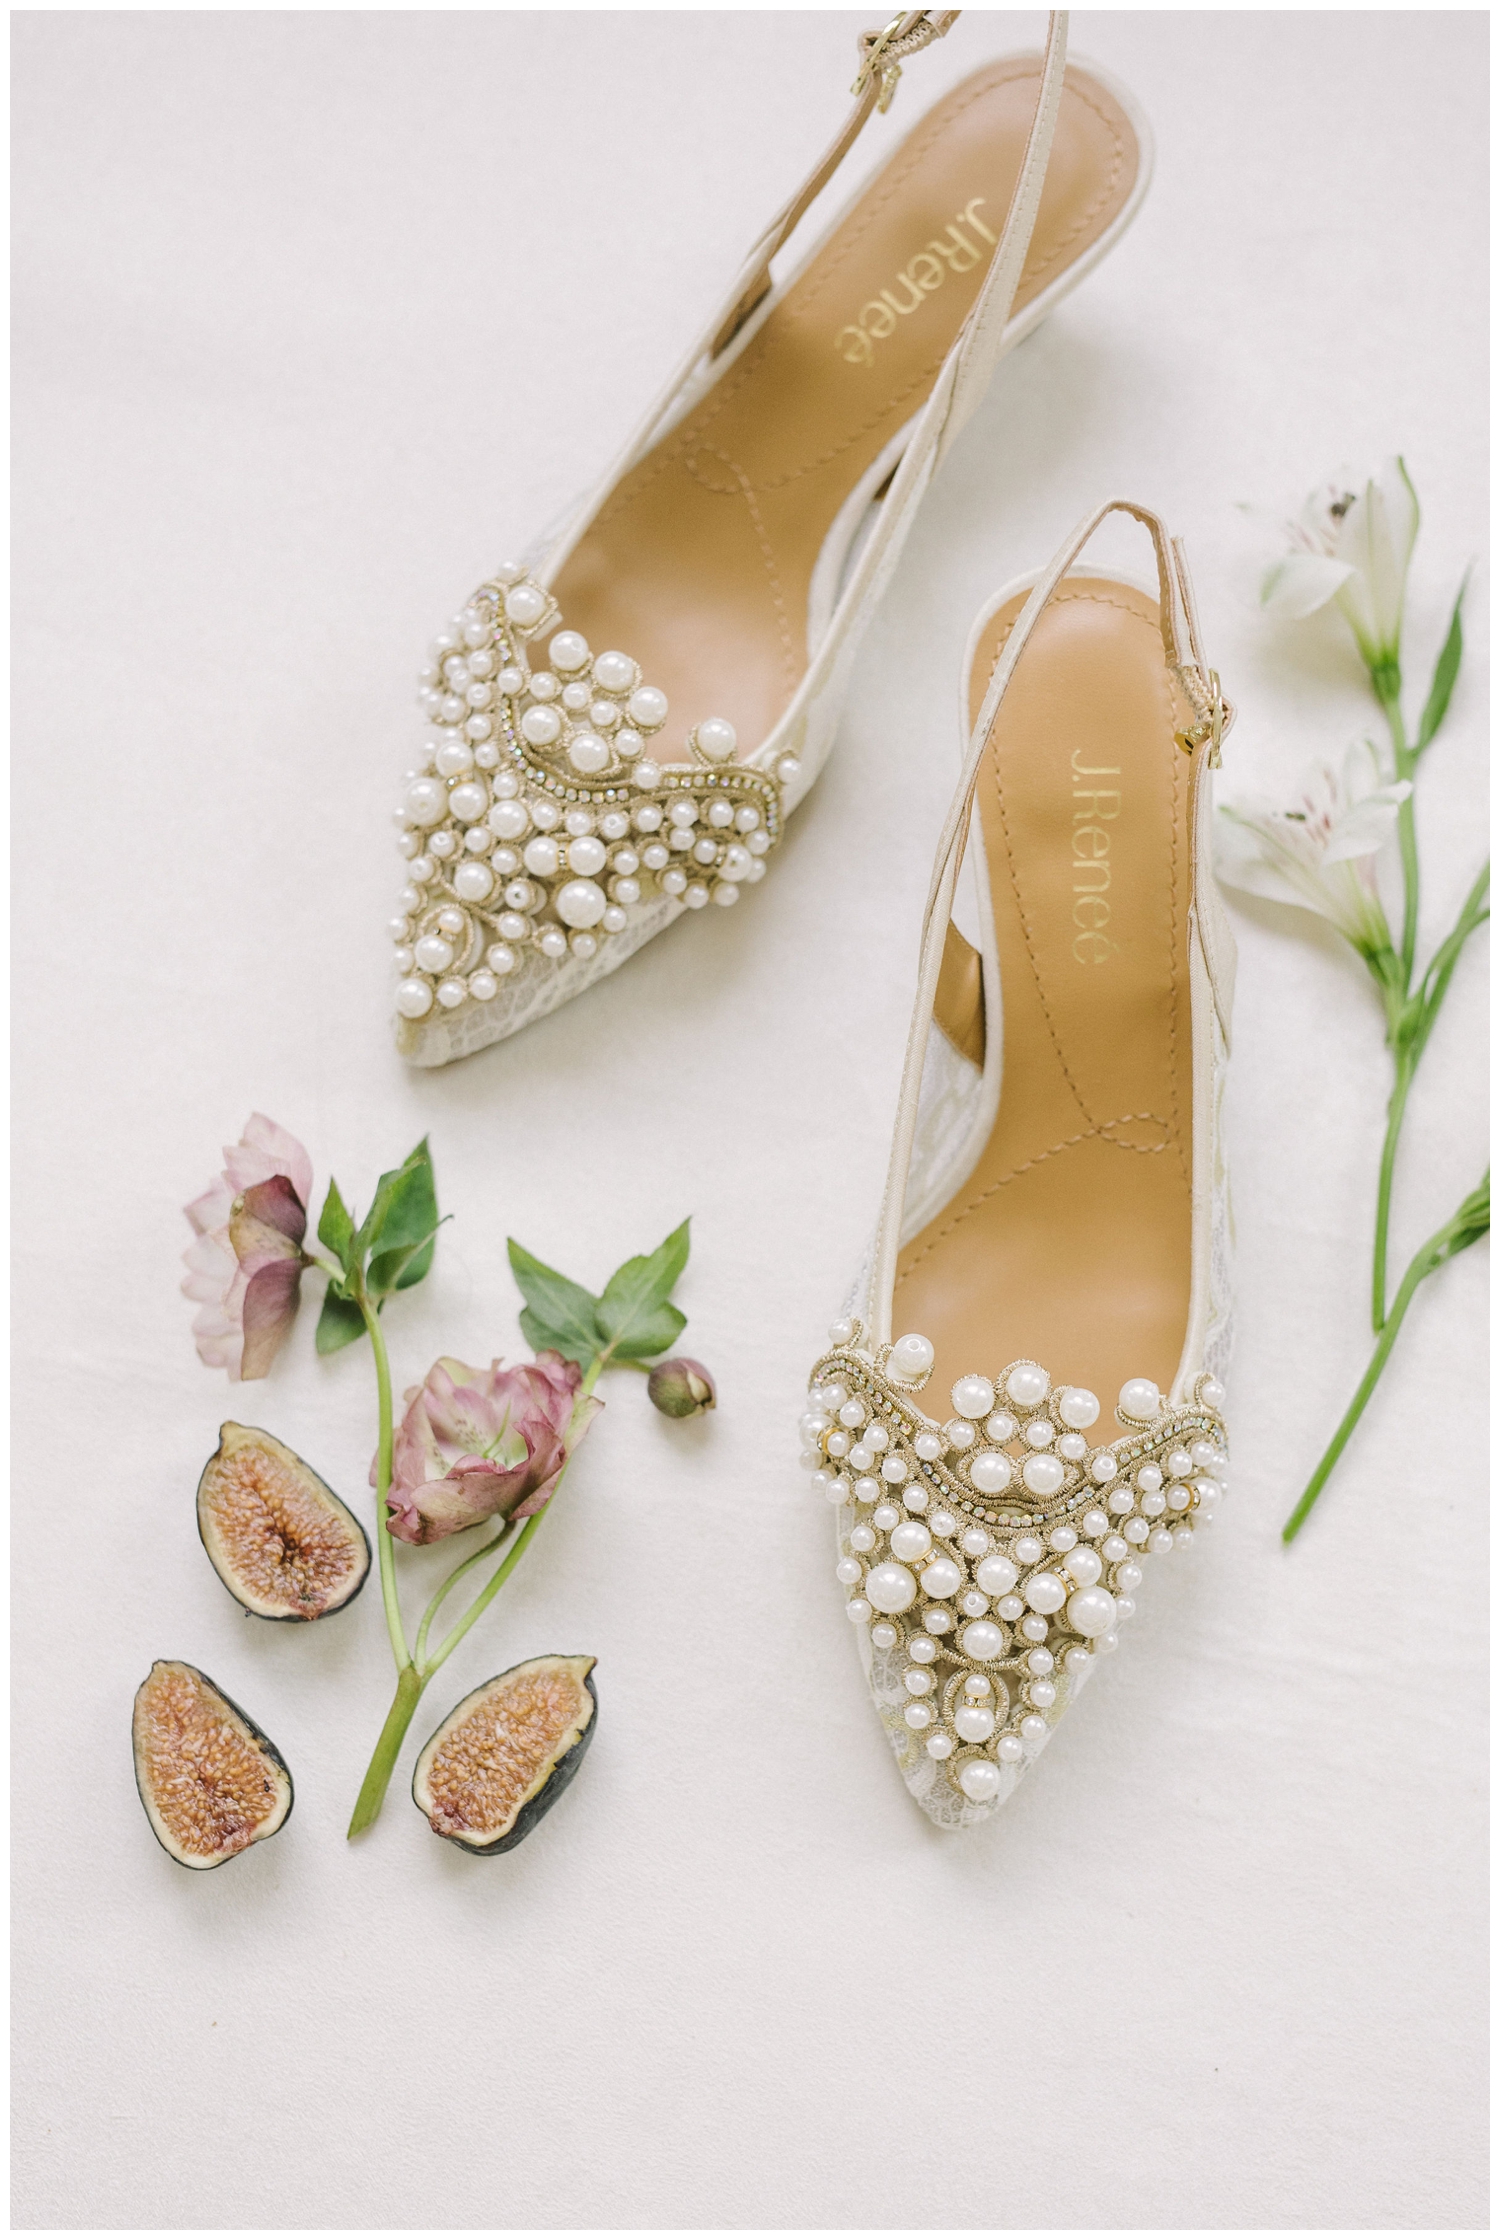 pearl heels with florals and figs surrounding them